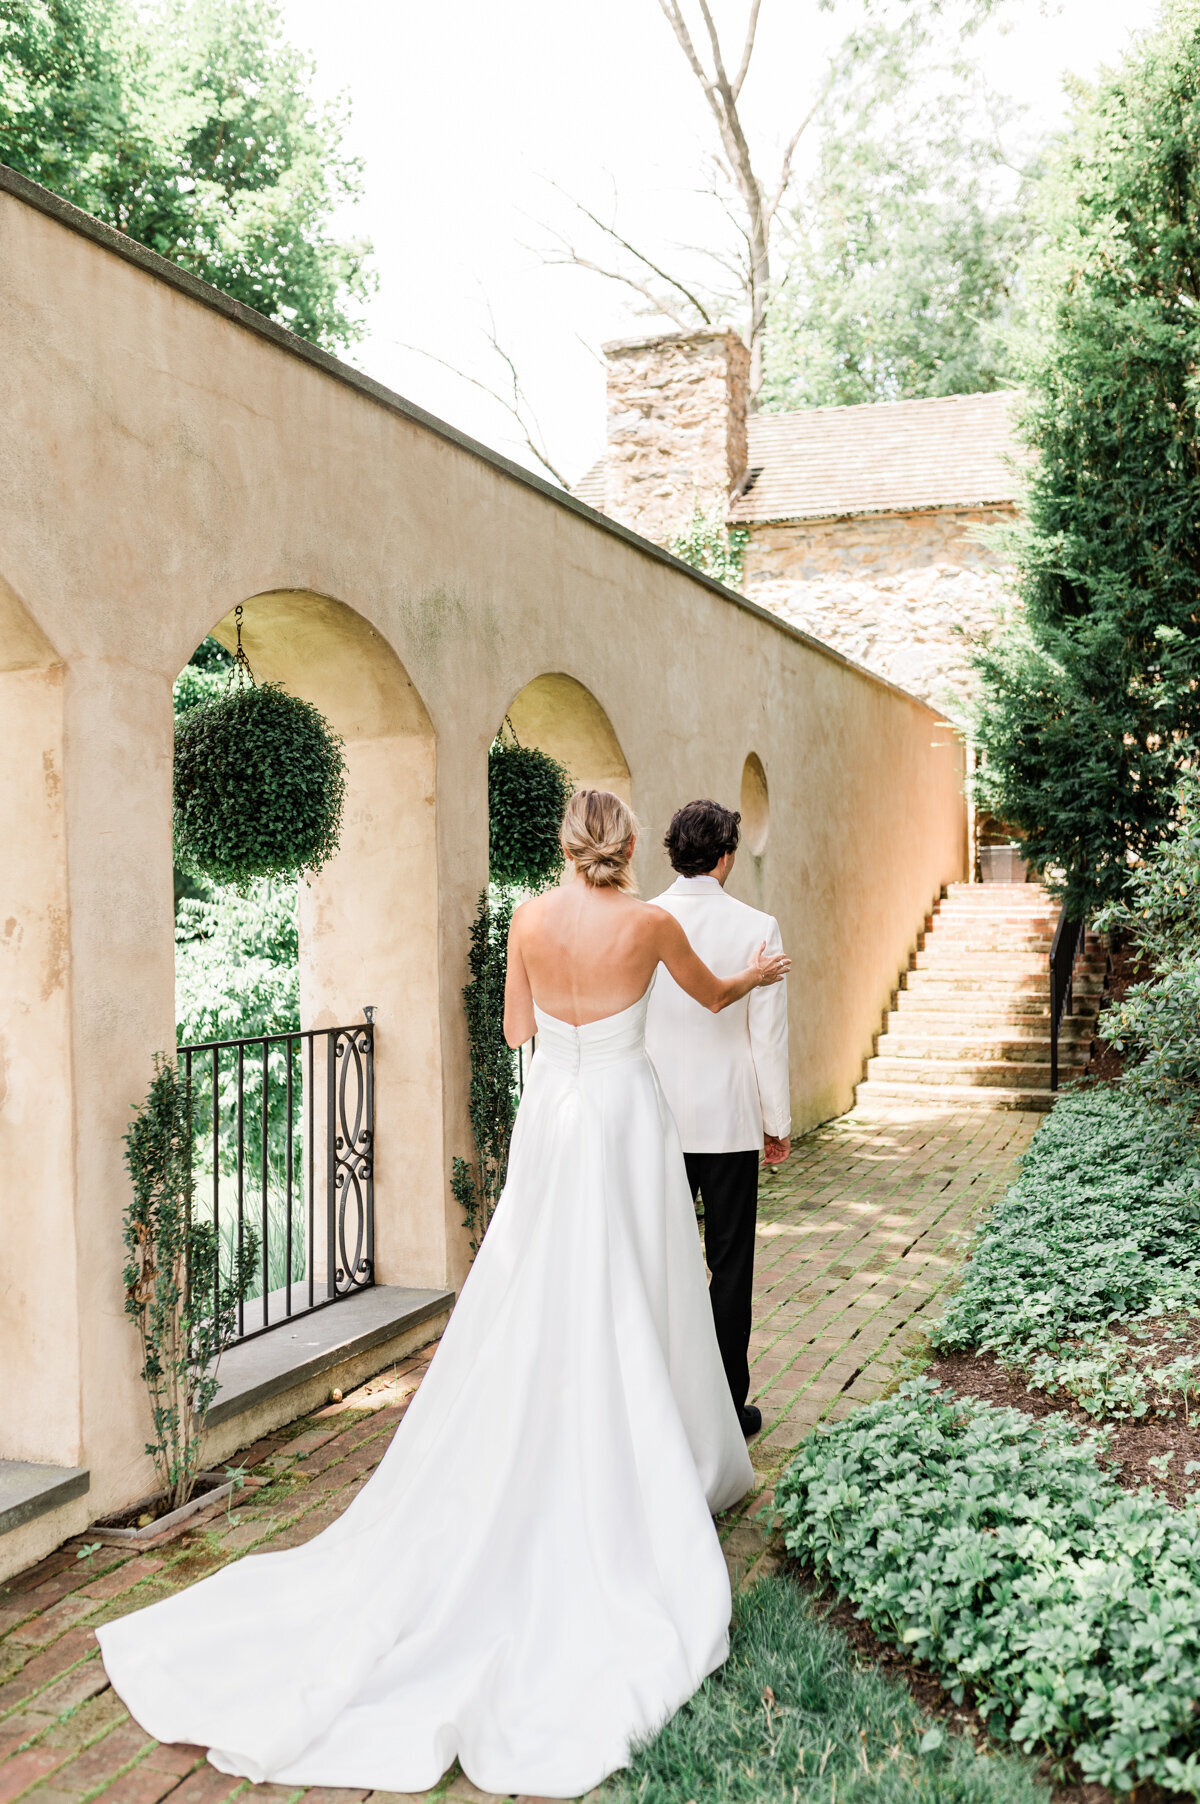 Château Dreams: Elevate your wedding with our luxury photography amidst the opulent châteaus of France & Italy. Our images reflect the grandeur and elegance of your special day.